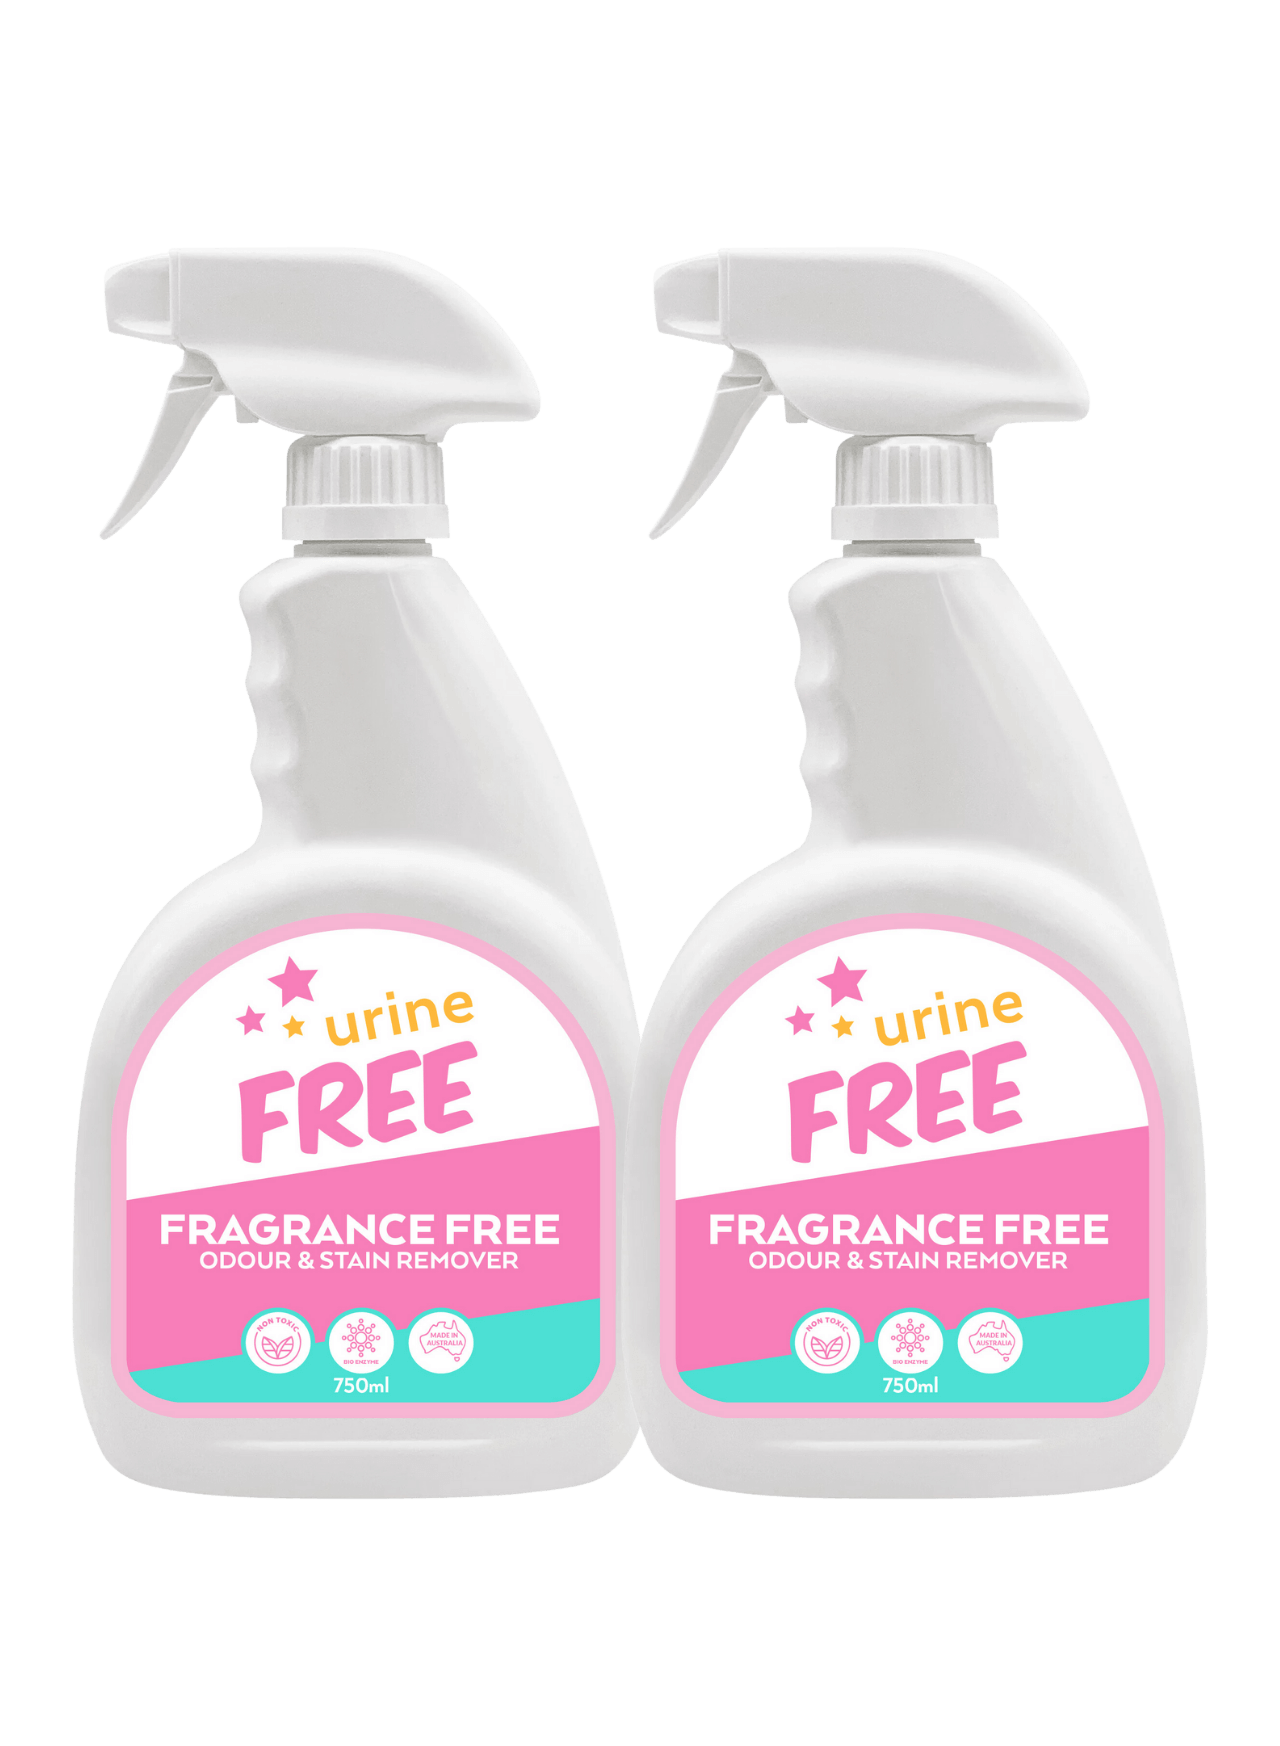 Fragrance Free Urine Stain & Odour Remover Dual Pack